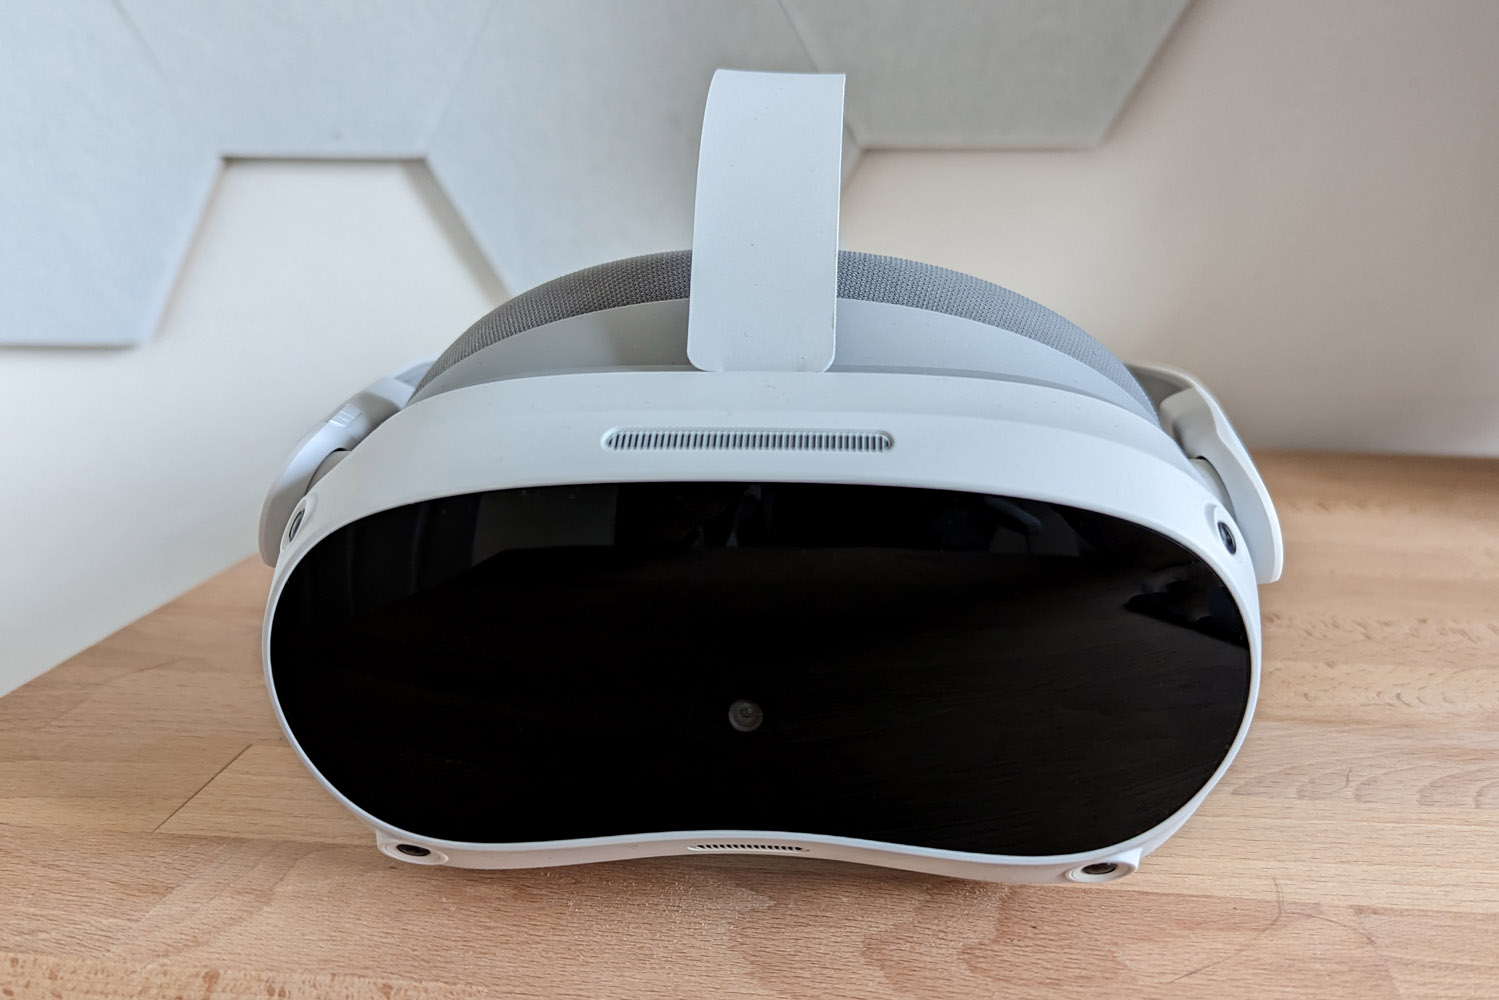 Pico 4 VR headset front